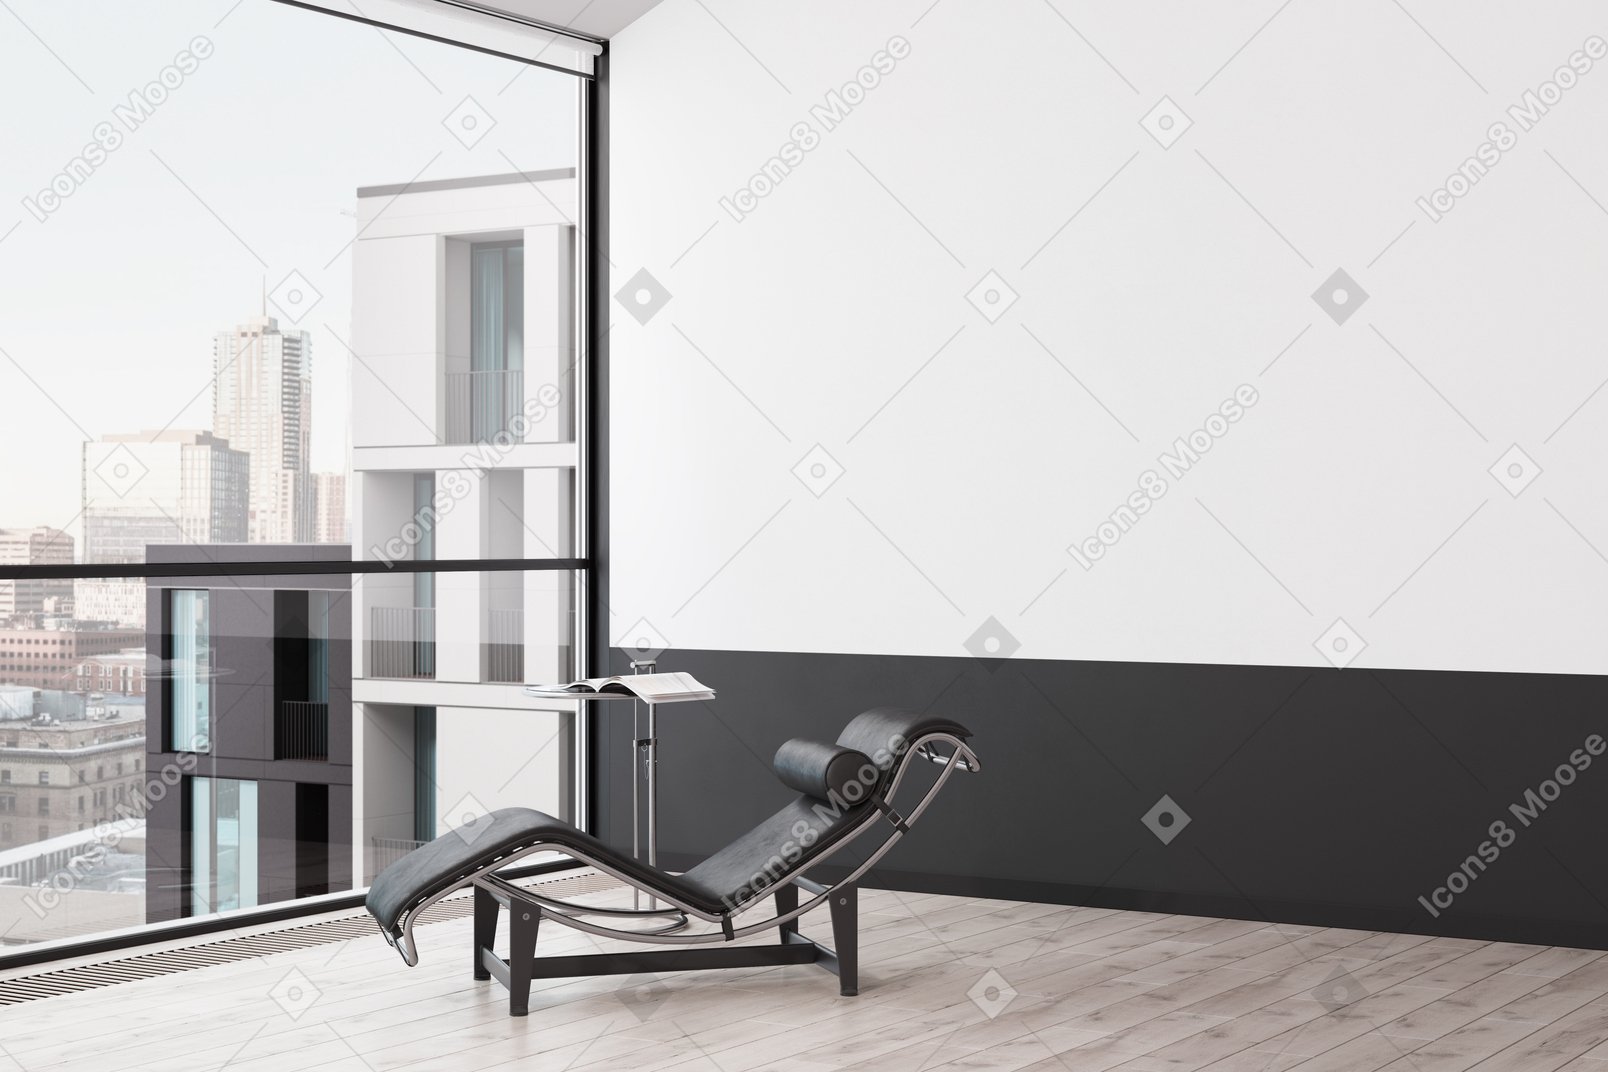 Empty room with panoramic window and reclining chair